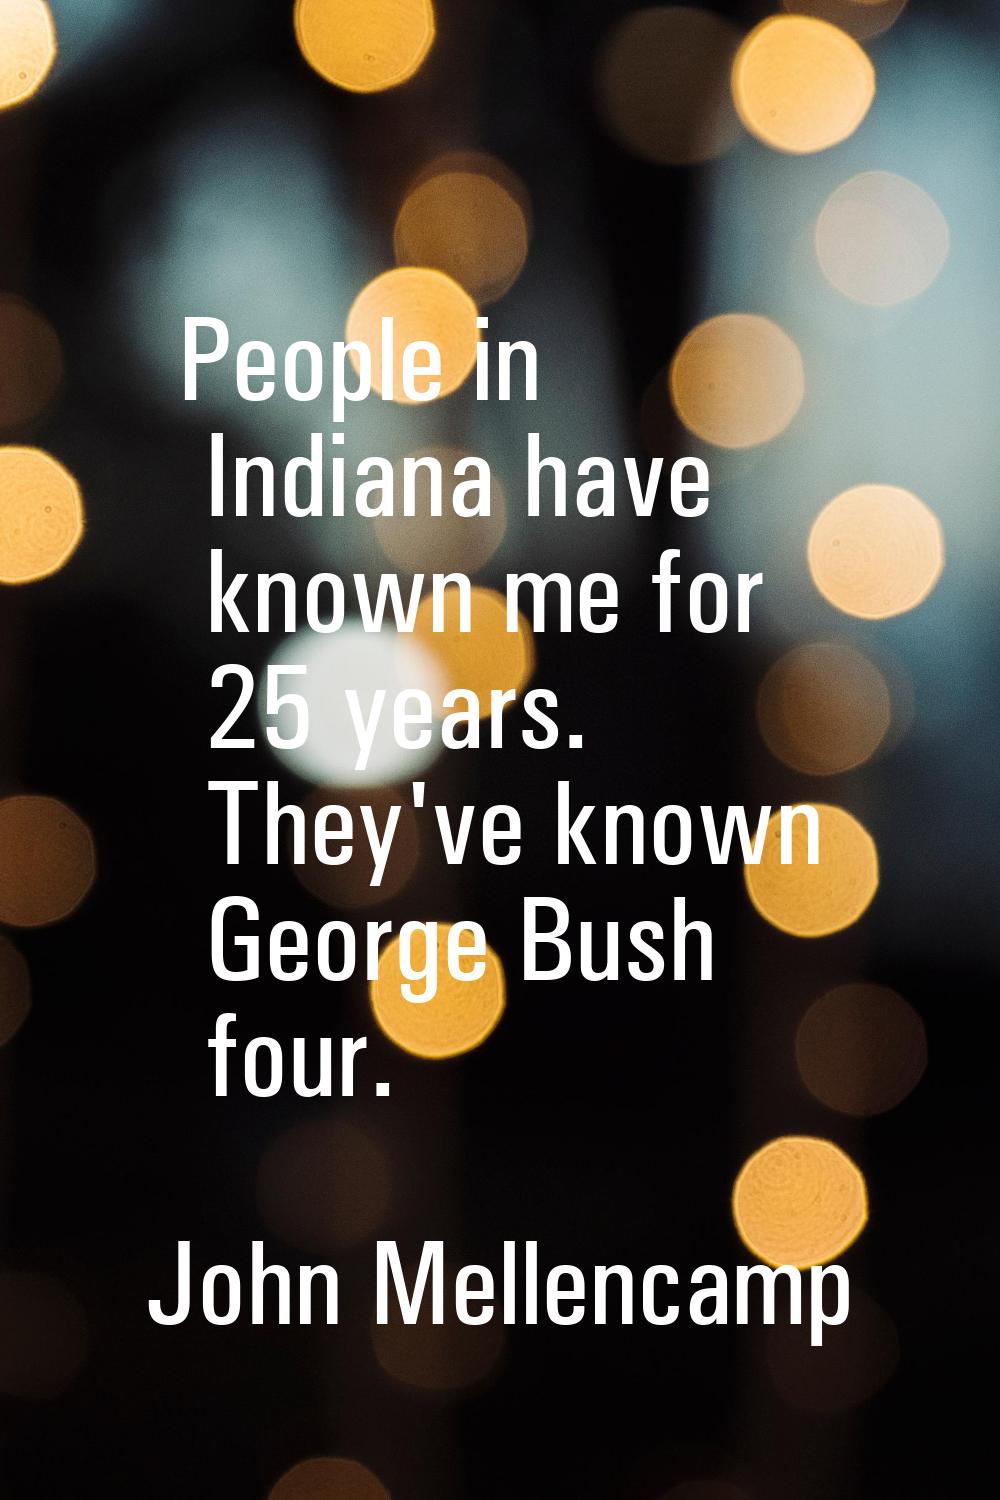 People in Indiana have known me for 25 years. They've known George Bush four.